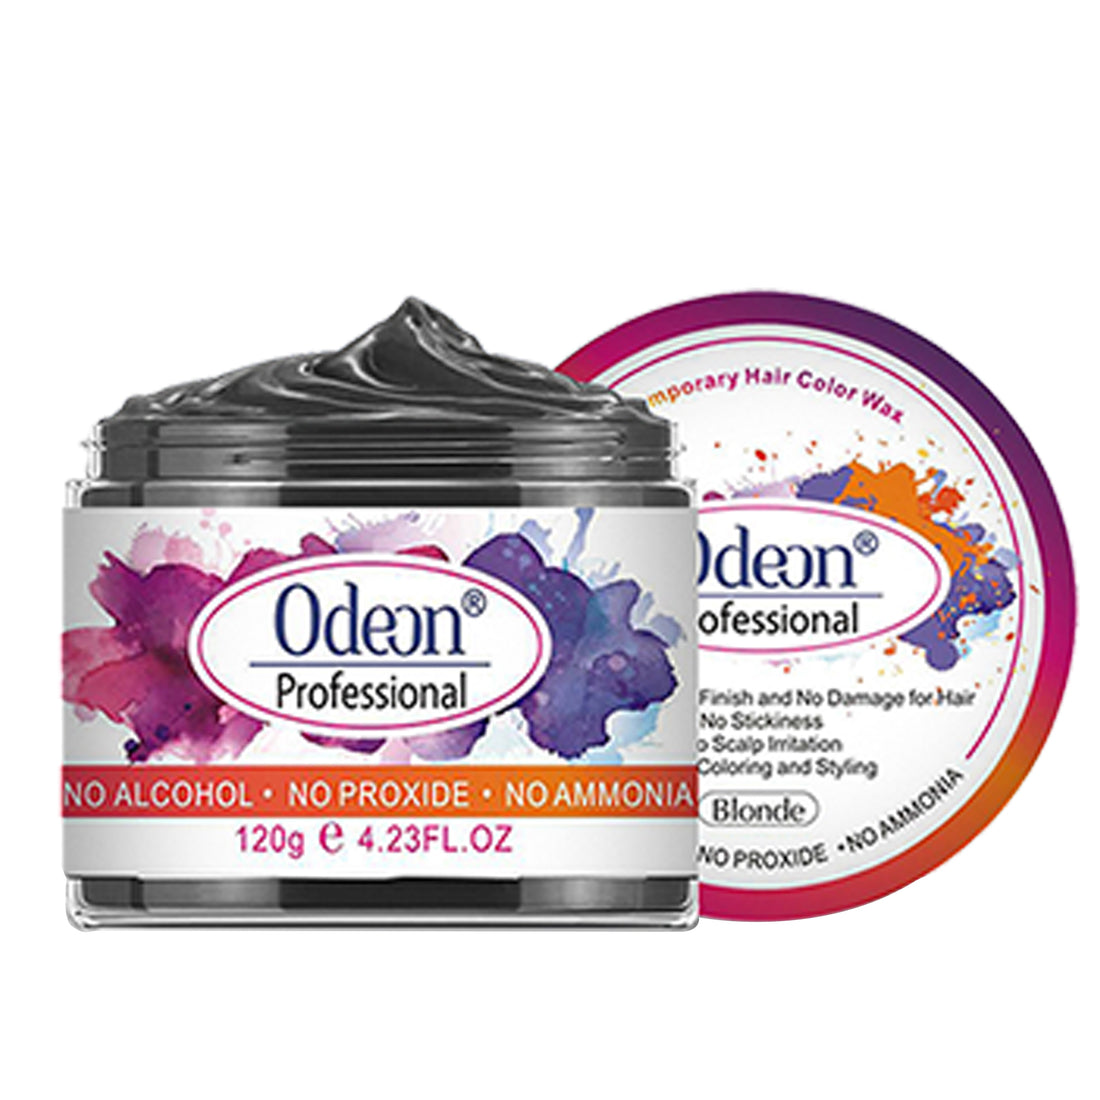 ODEON® HAIR COLOR WAX BLONDE (4.23oz)